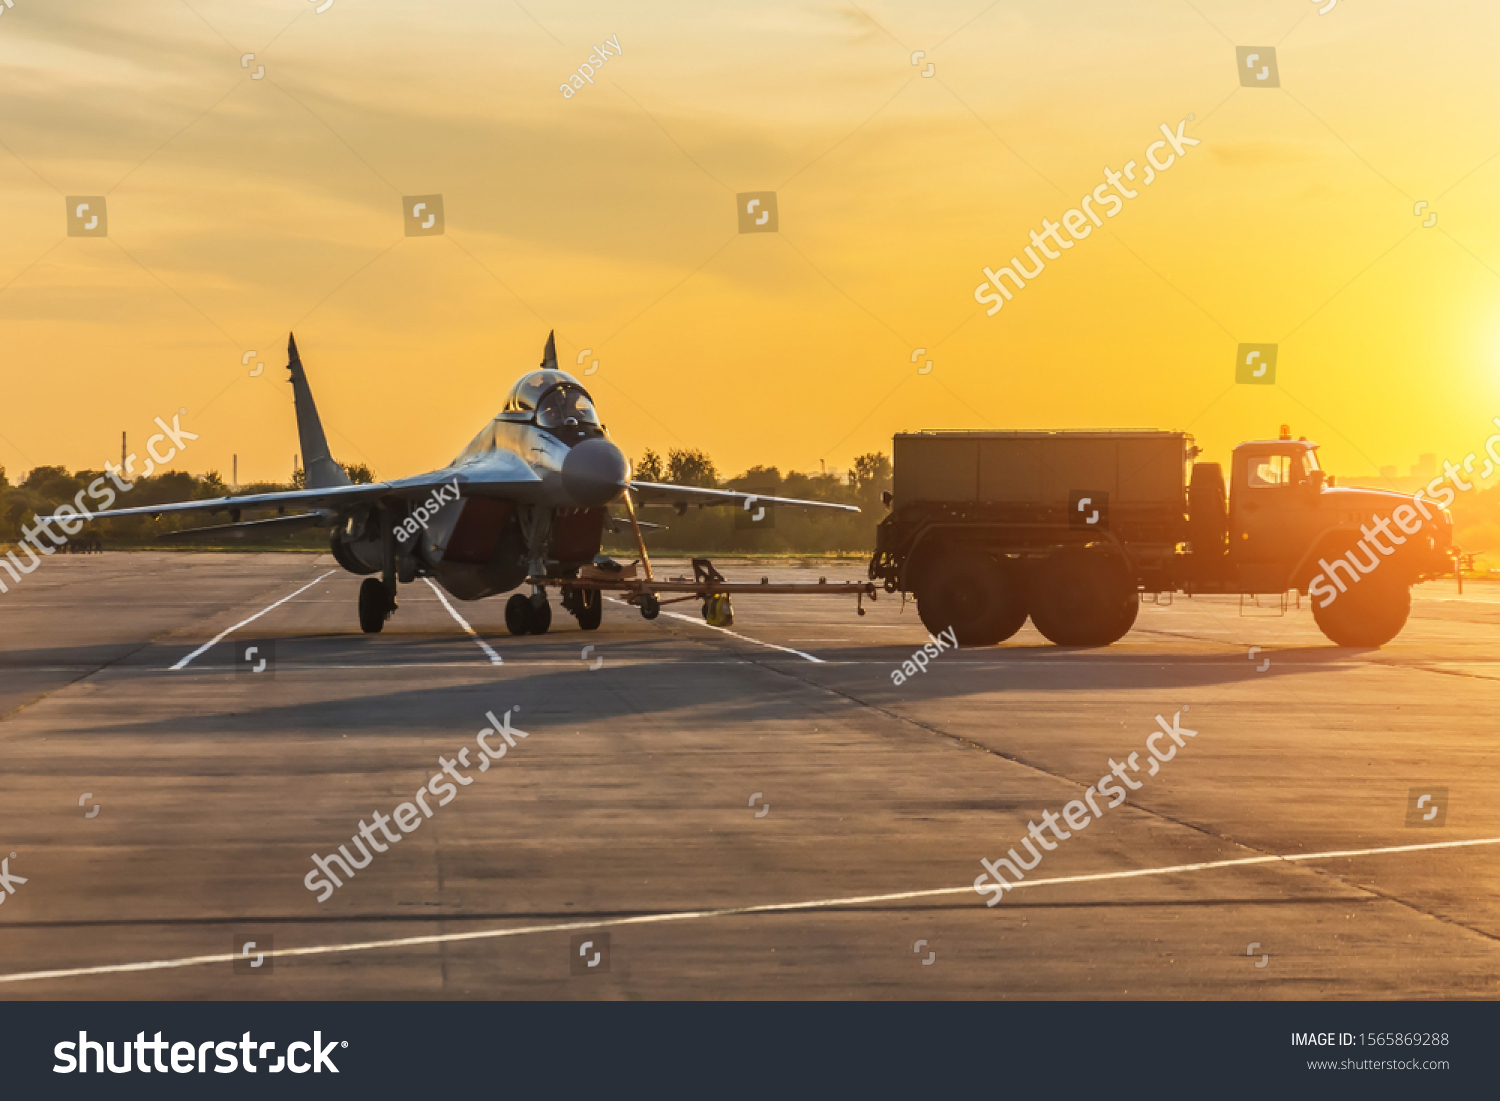 Military fighter is being pushed to a parking lot by a military vehicle at an air base in the evening at sunset #1565869288